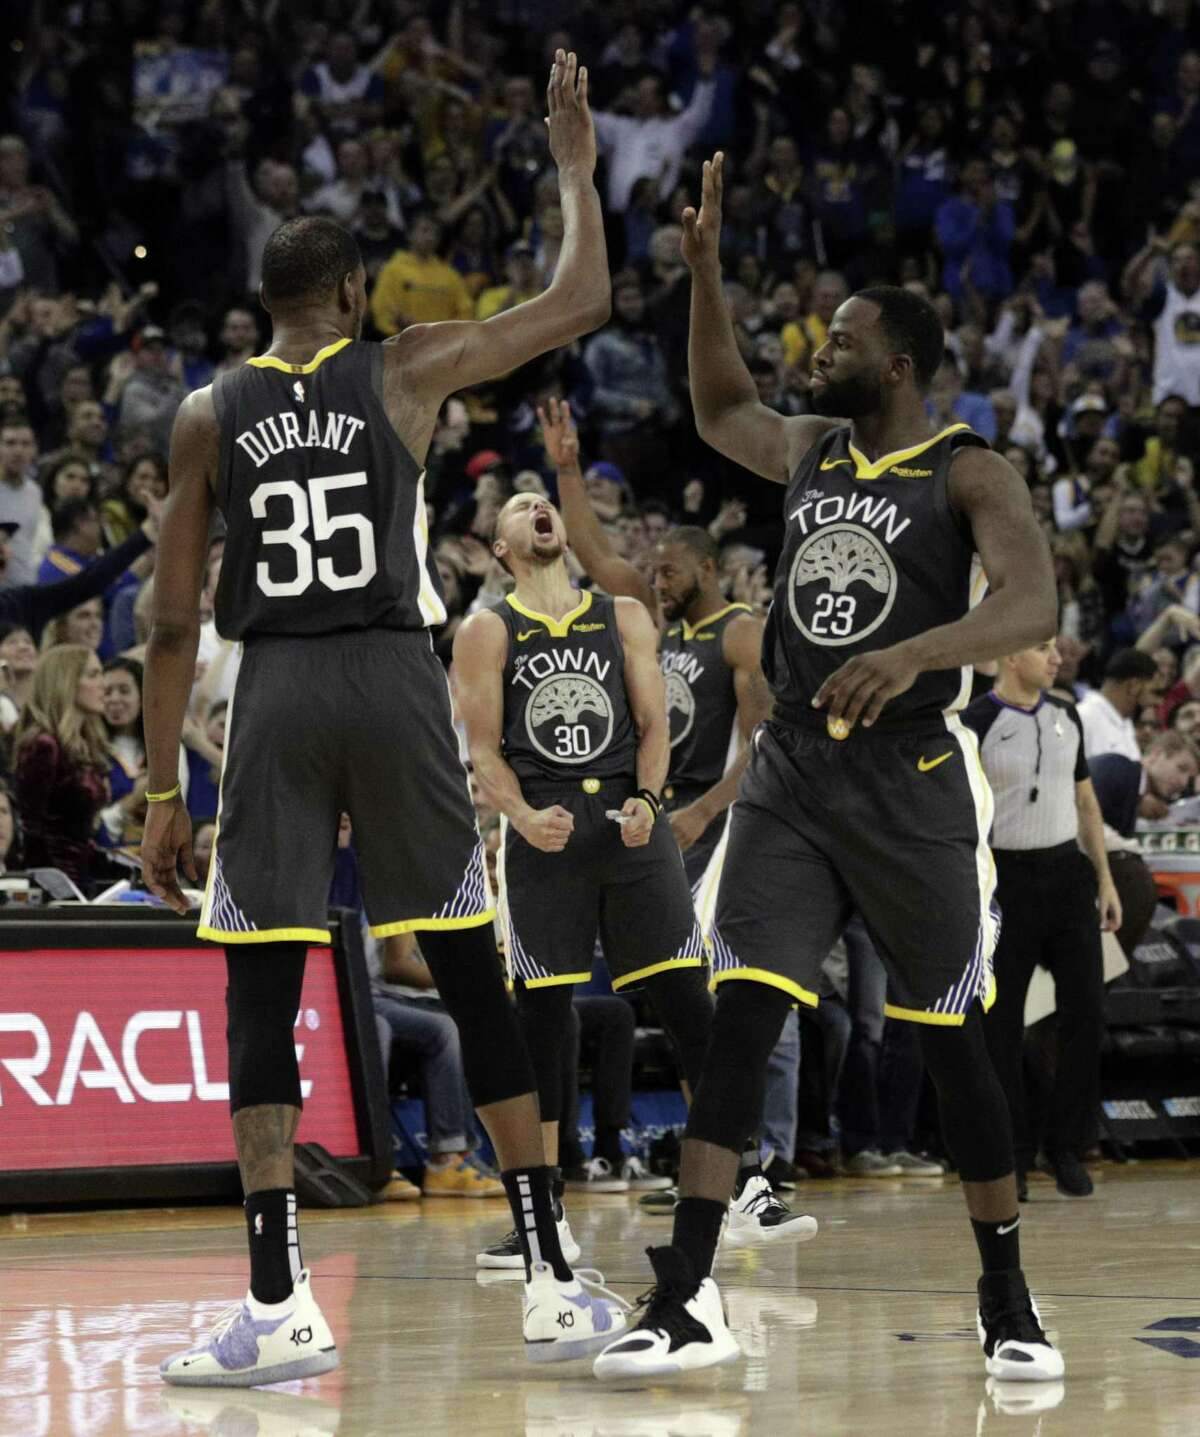 Protagonist Stephen Curry and Draymond Green celebrate a trey by Kevin Durant, who’s central to the dynasty plotline.